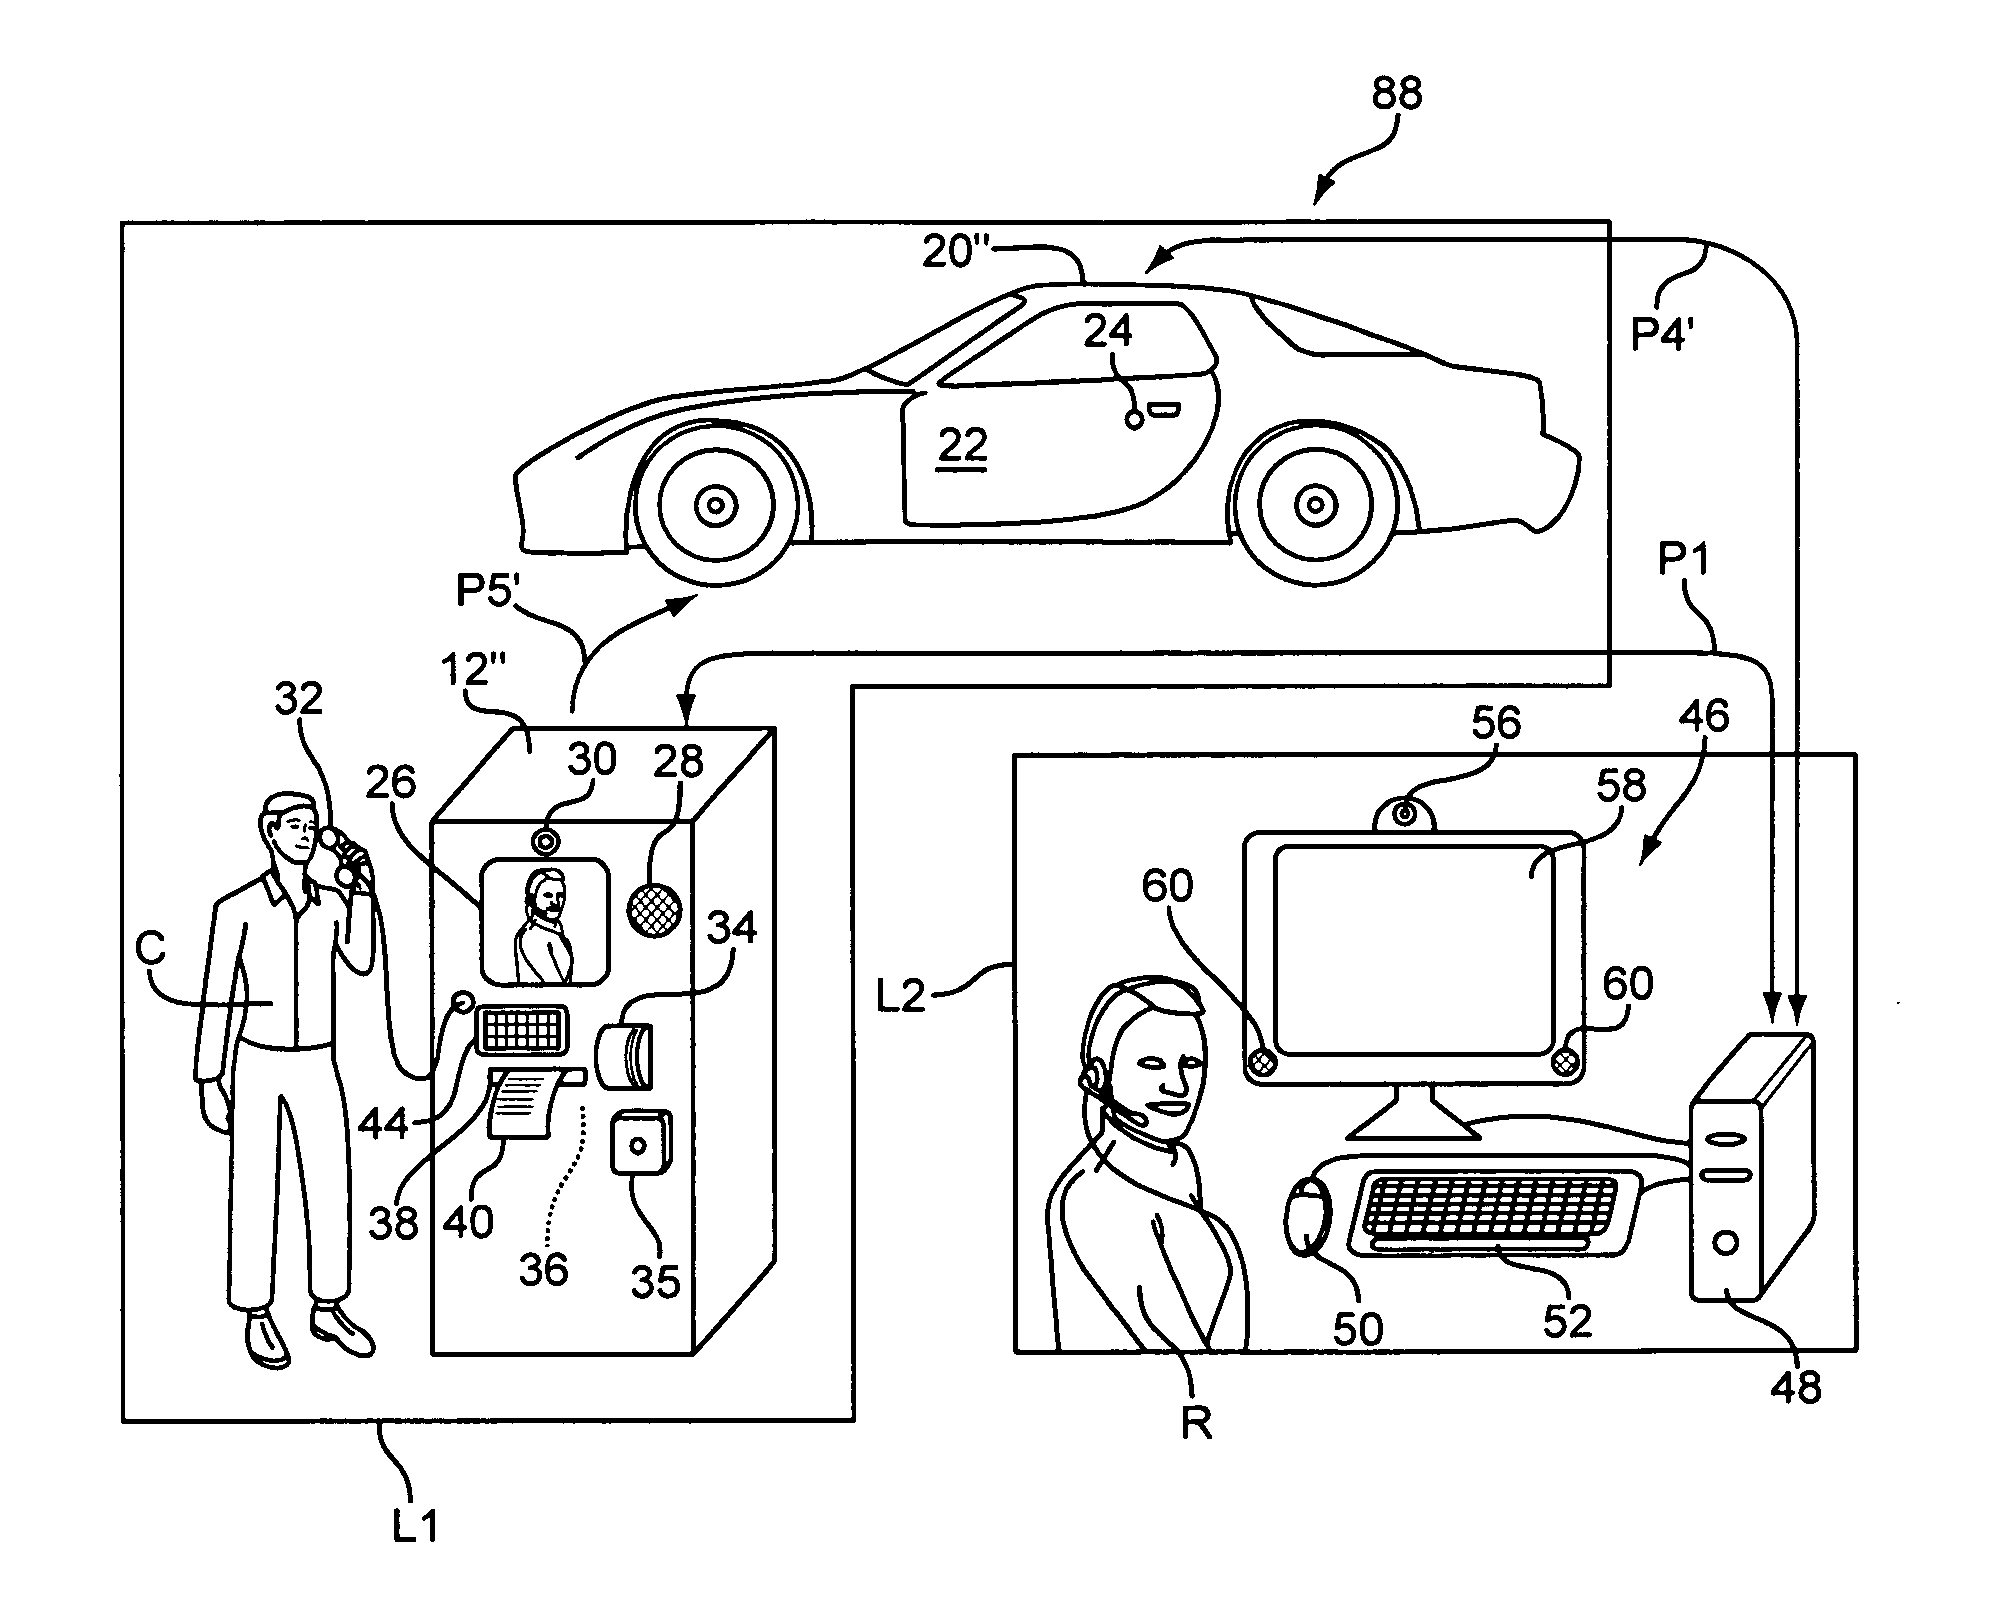 Vehicle rental system and method